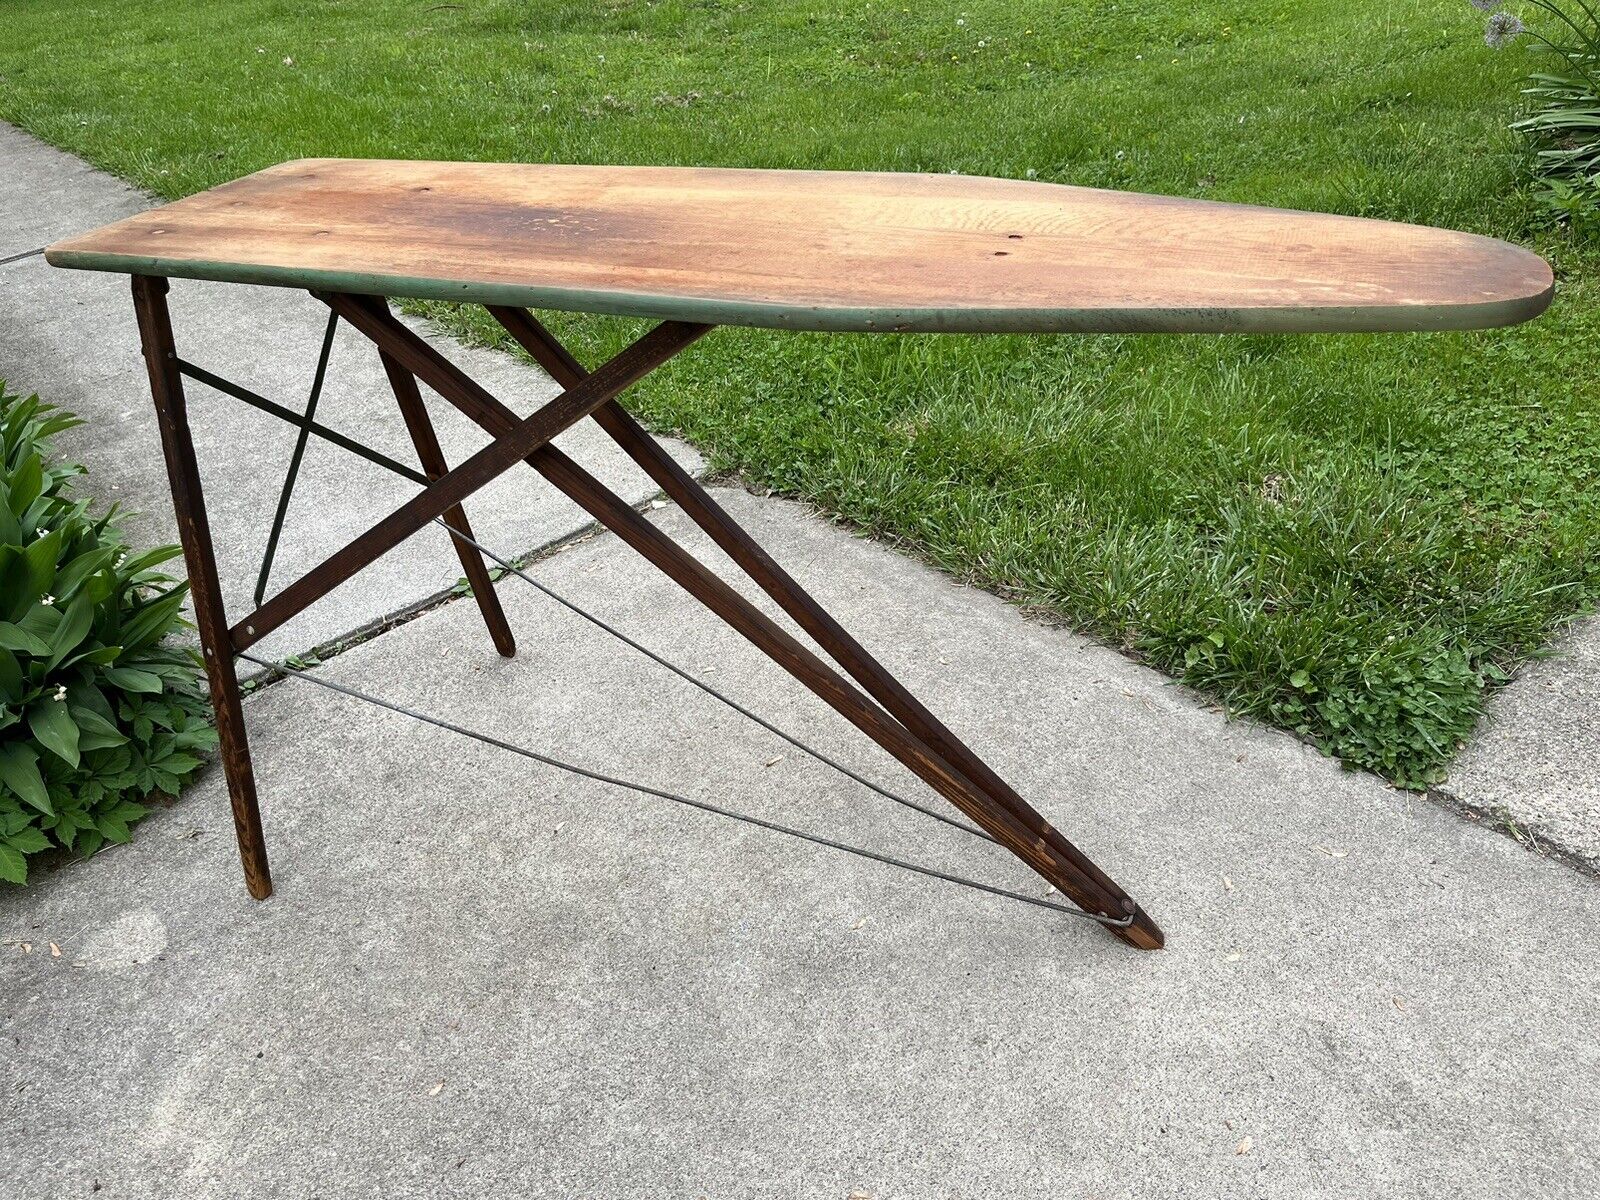 Vintage Antique Wooden Ironing Board Primitive Patina Decor Full Size Wood Top